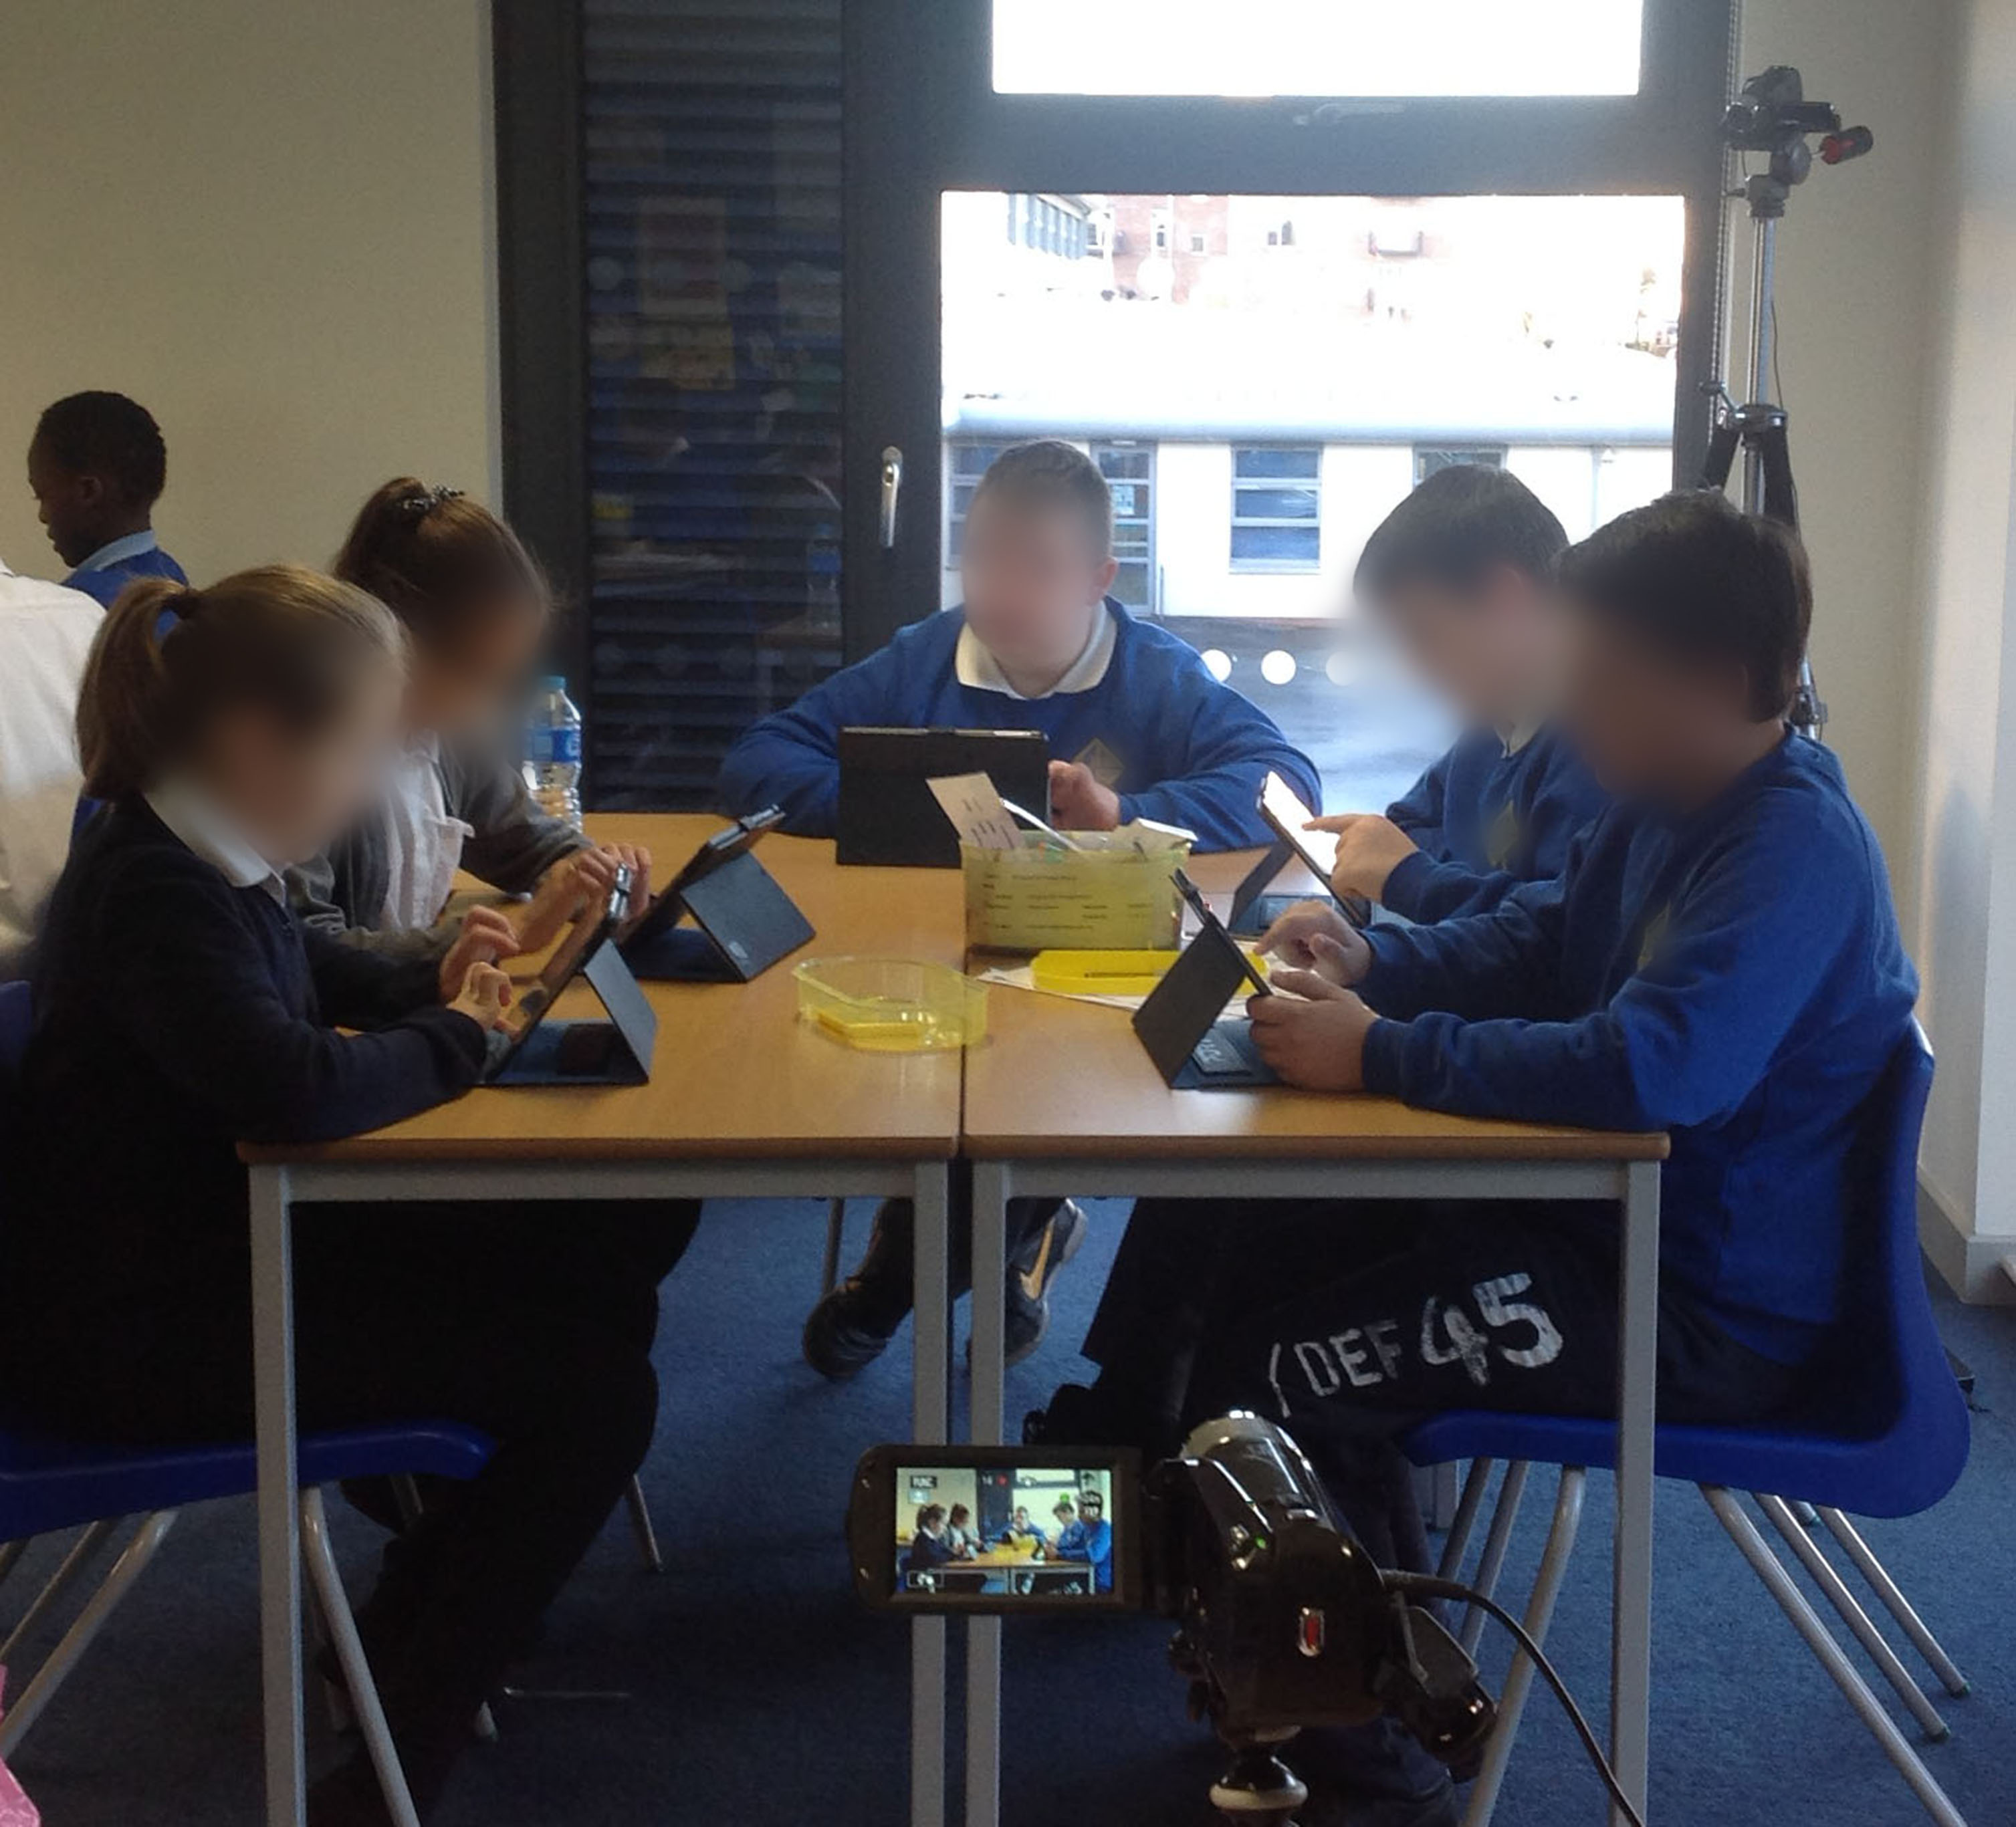 Children sitting at a desk using their iPads